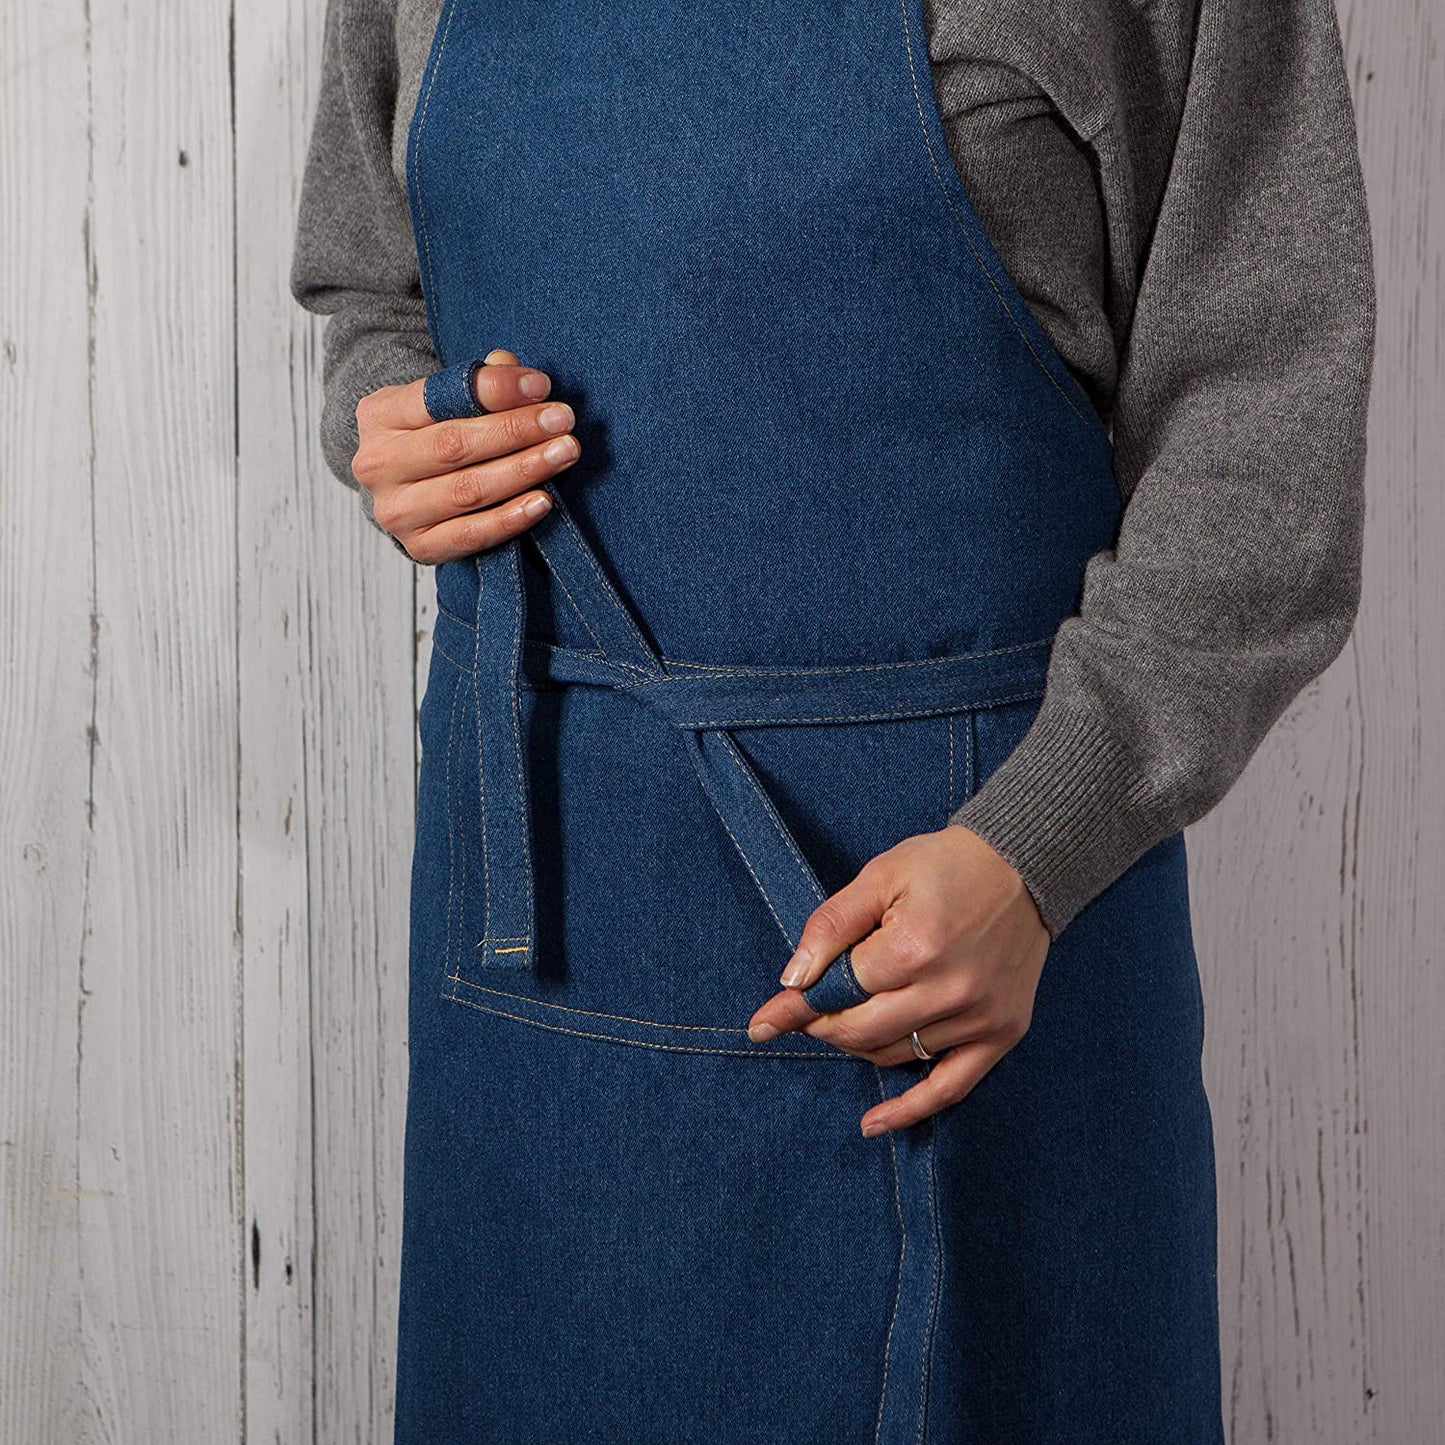 person wearing apron and tying it around their waist.